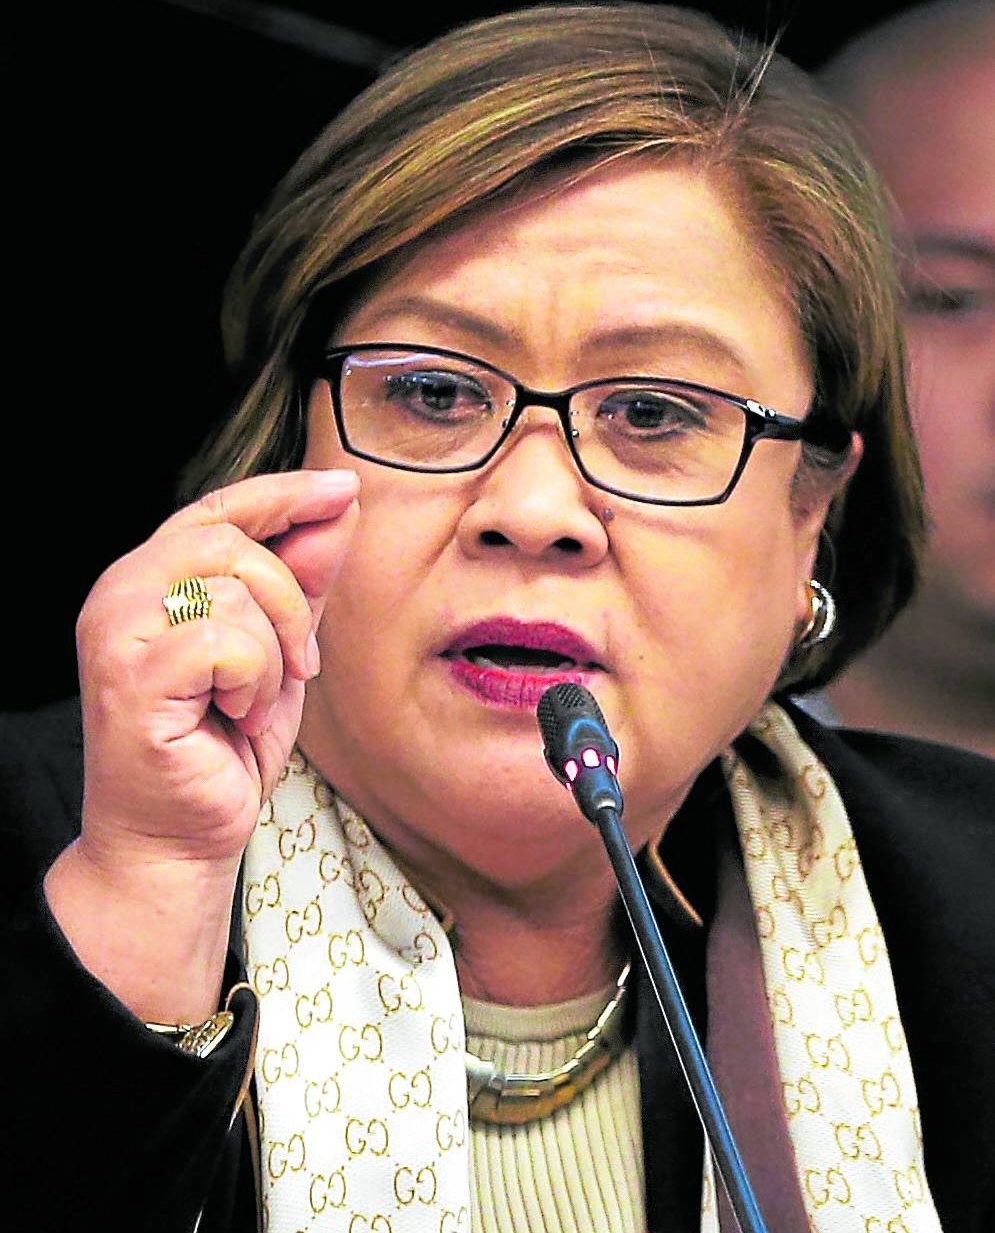 De Lima wants onlince call with sick mom